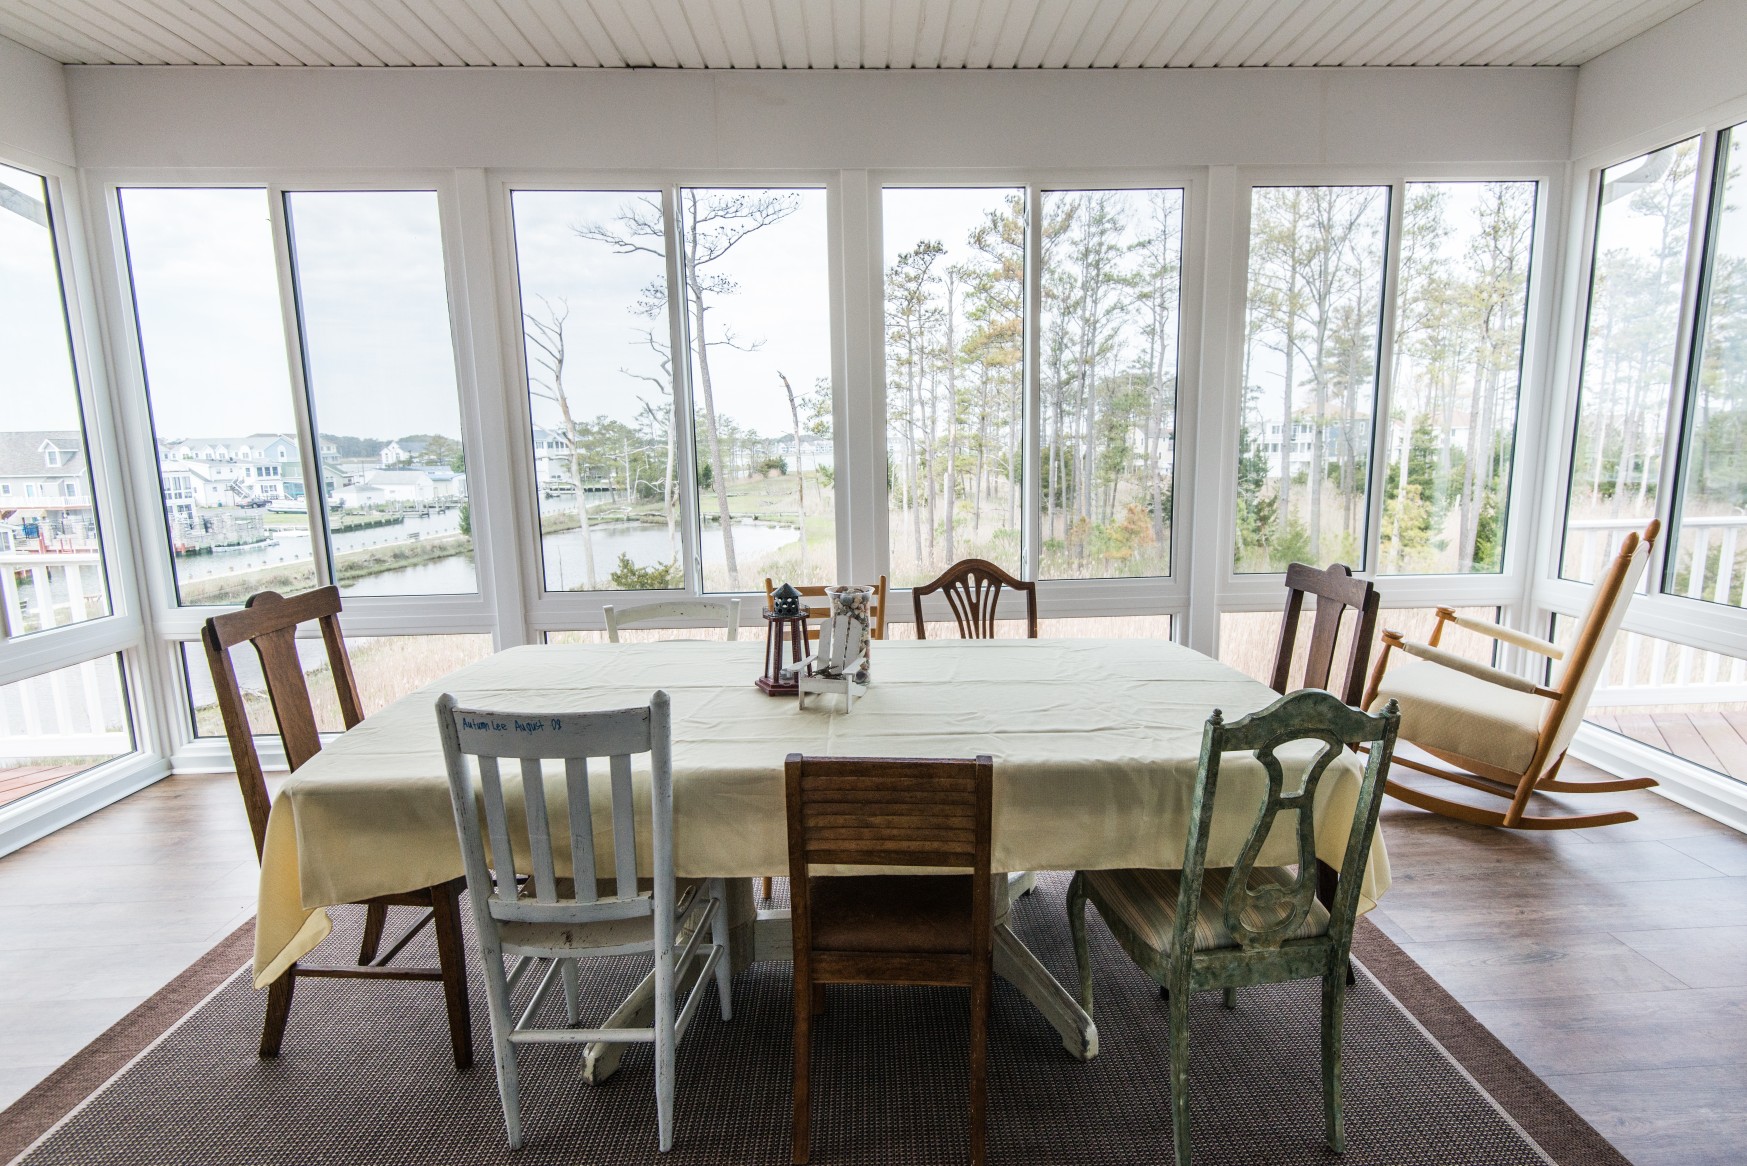 Whitesview Court Sunroom Vol.2 in Ocean View DE Between Two Decks with COREtec Plus Flooring and Large Table